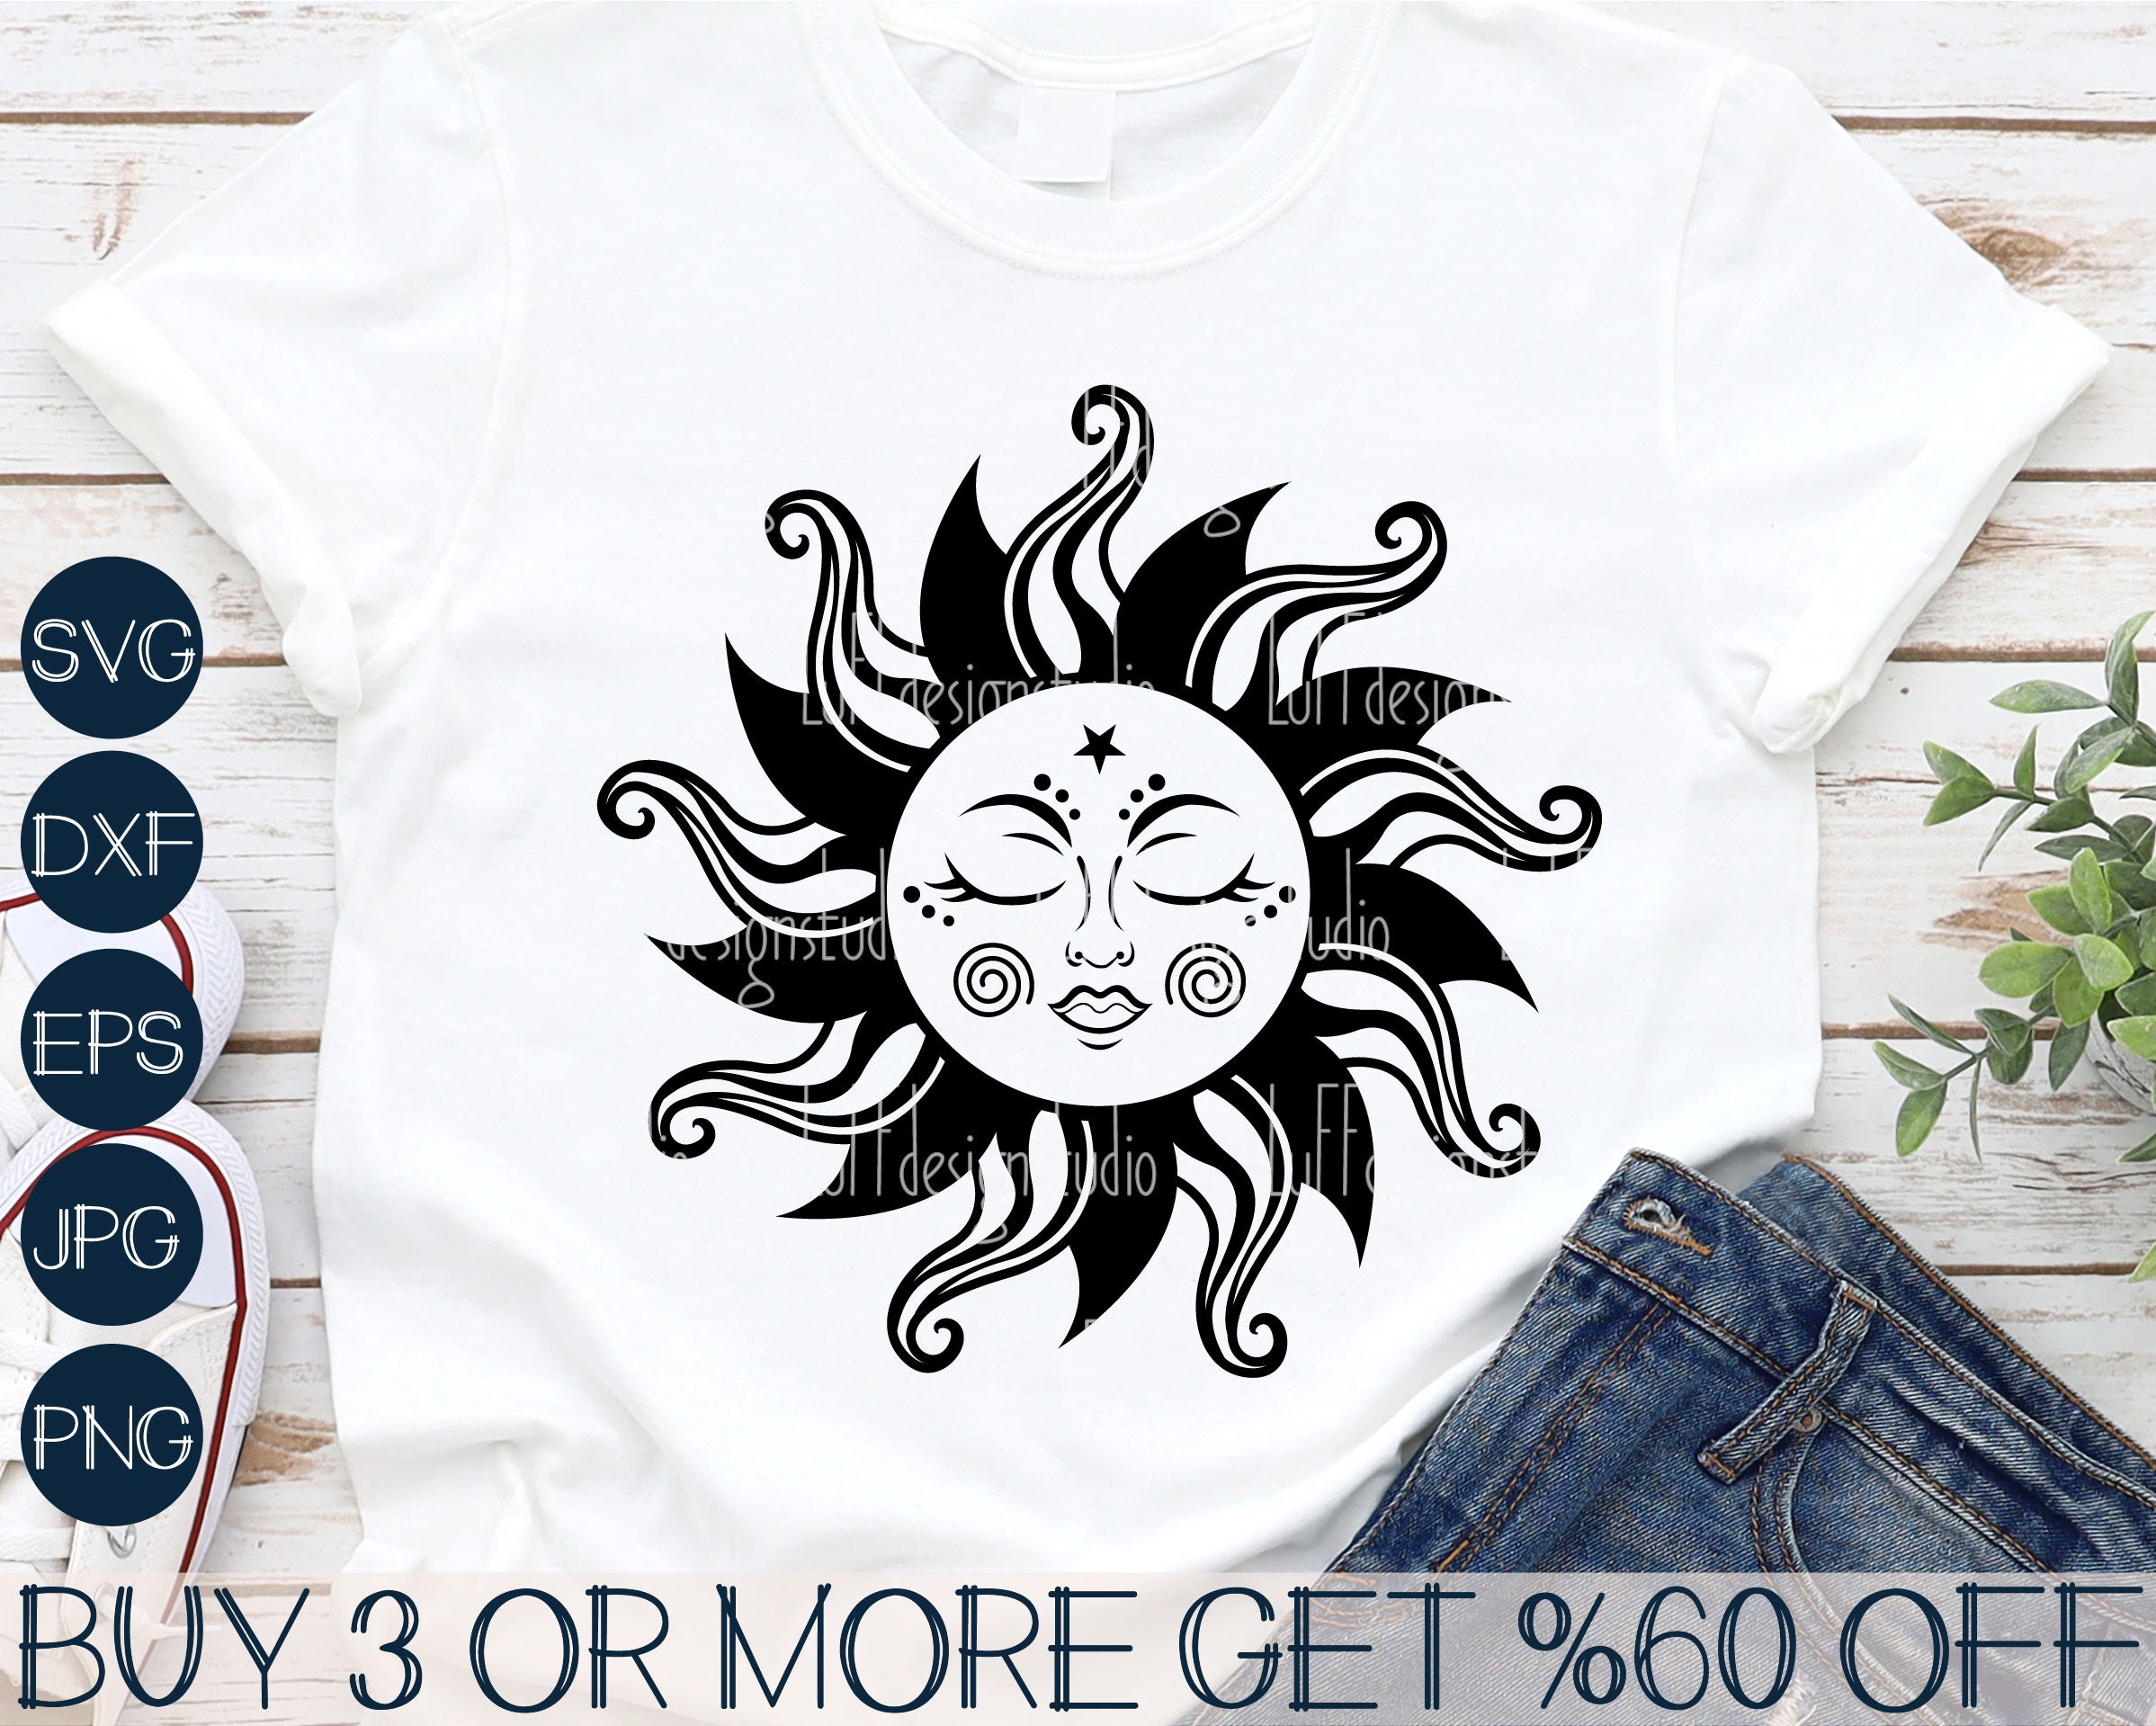 Realistic Moon PNG & SVG Design For T-Shirts